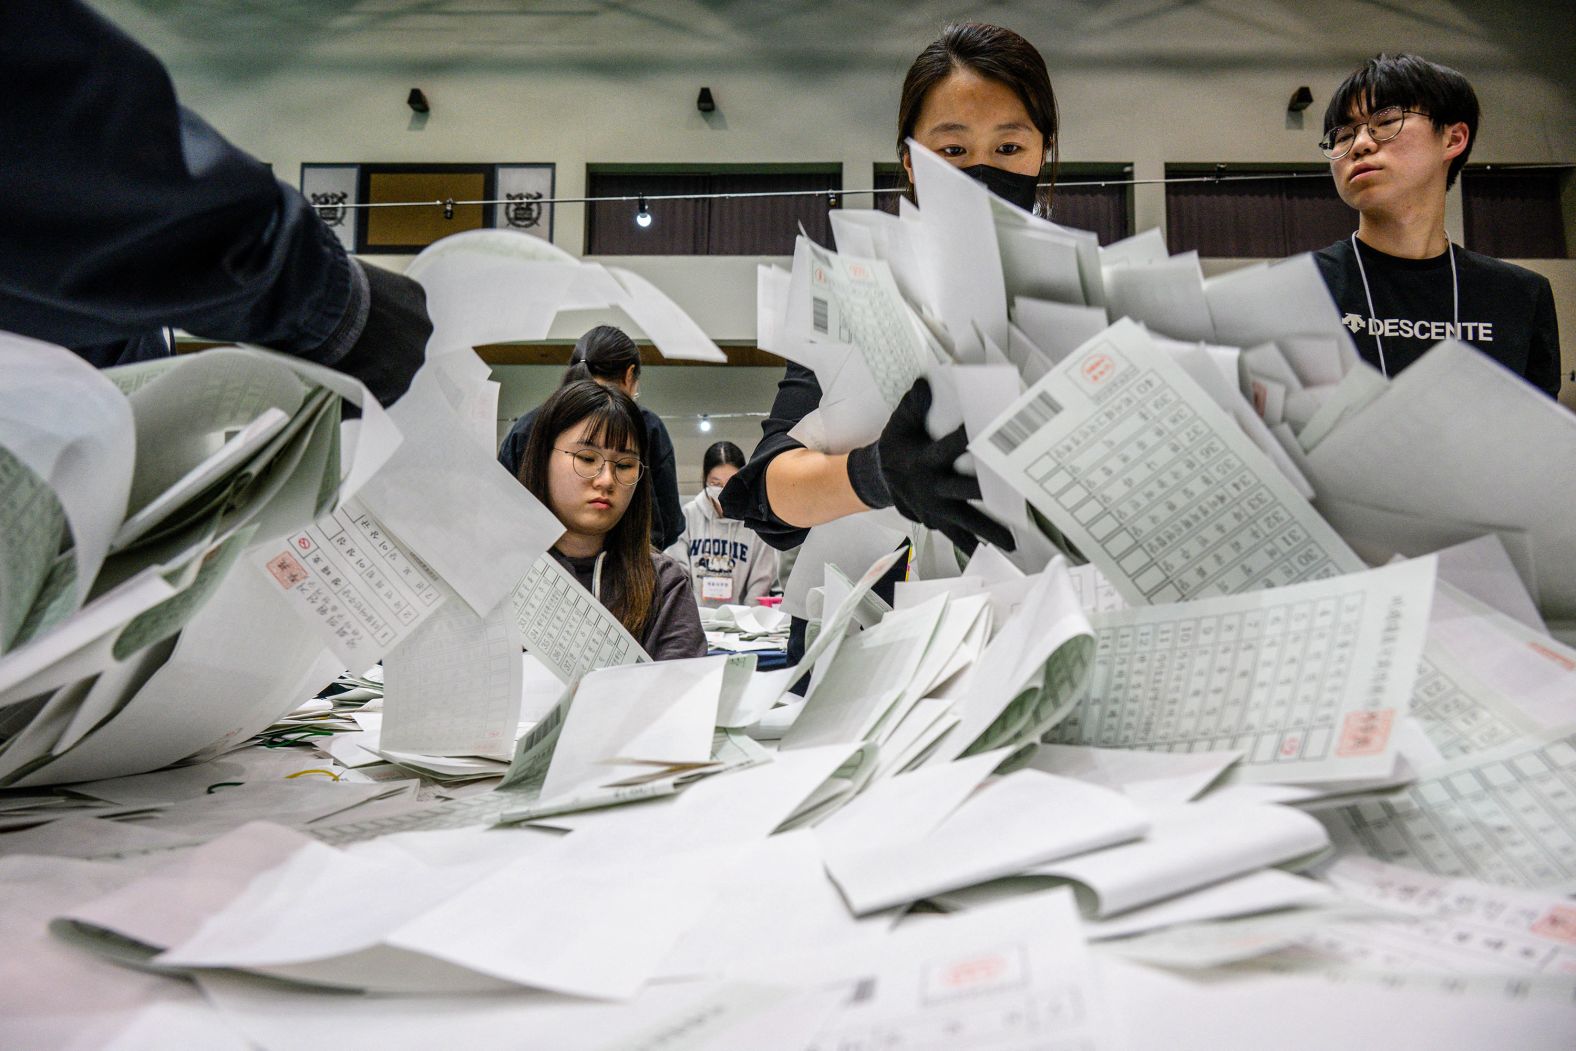 Election officials sort through ballots at a counting station in Seoul, South Korea, after voting closed on Wednesday, April 10. South Korea's liberal opposition parties <a href="index.php?page=&url=https%3A%2F%2Fwww.cnn.com%2F2024%2F04%2F10%2Fasia%2Fsouth-korea-midterm-election-intl-hnk%2Findex.html" target="_blank">scored a landslide victory</a> in the parliamentary election.